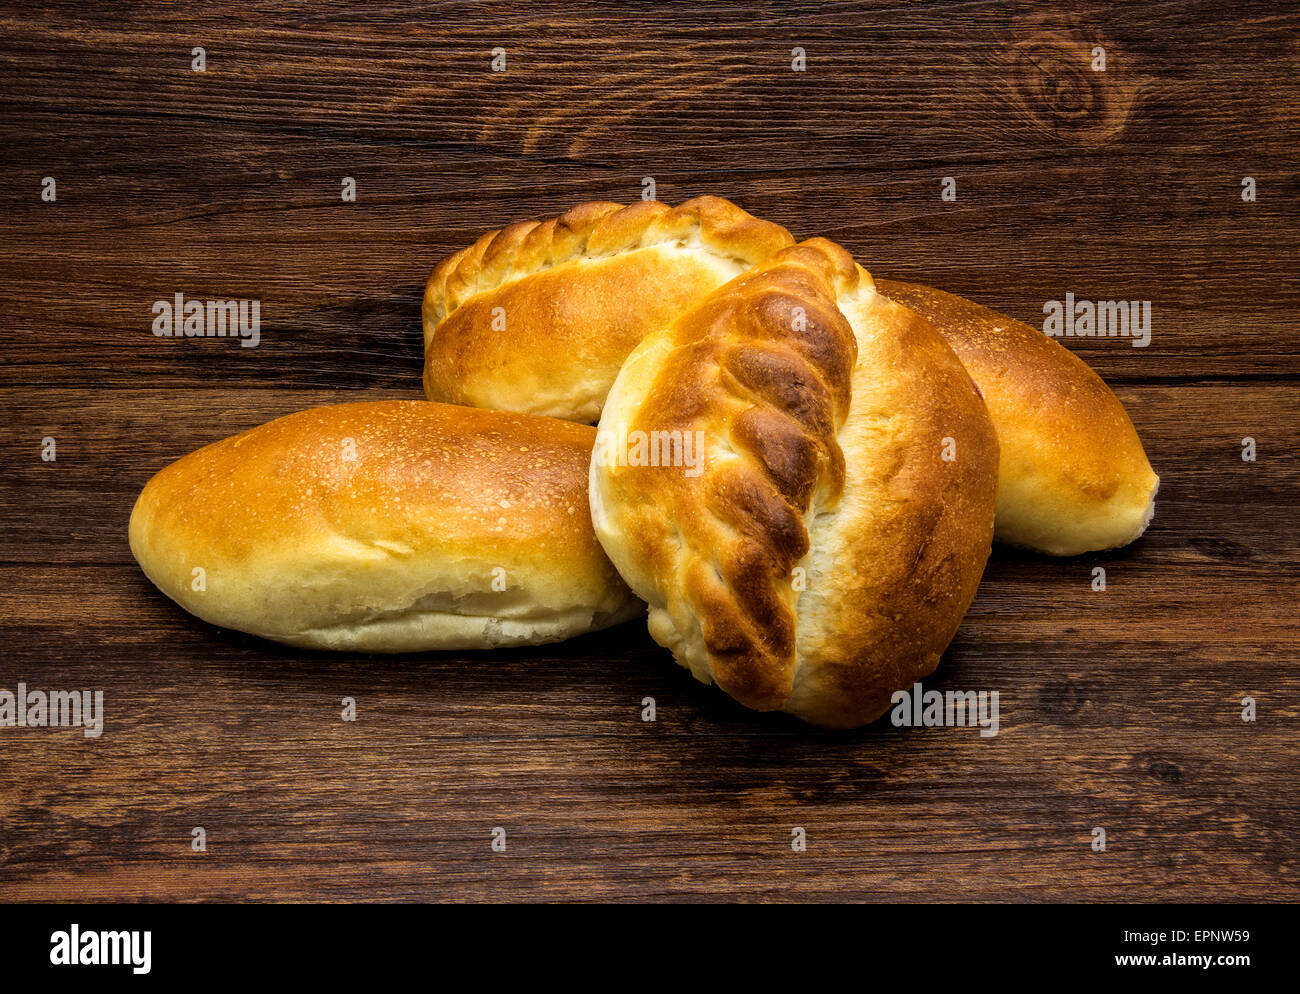 Crispy white buns on a wooden rustic background. Stock Photo